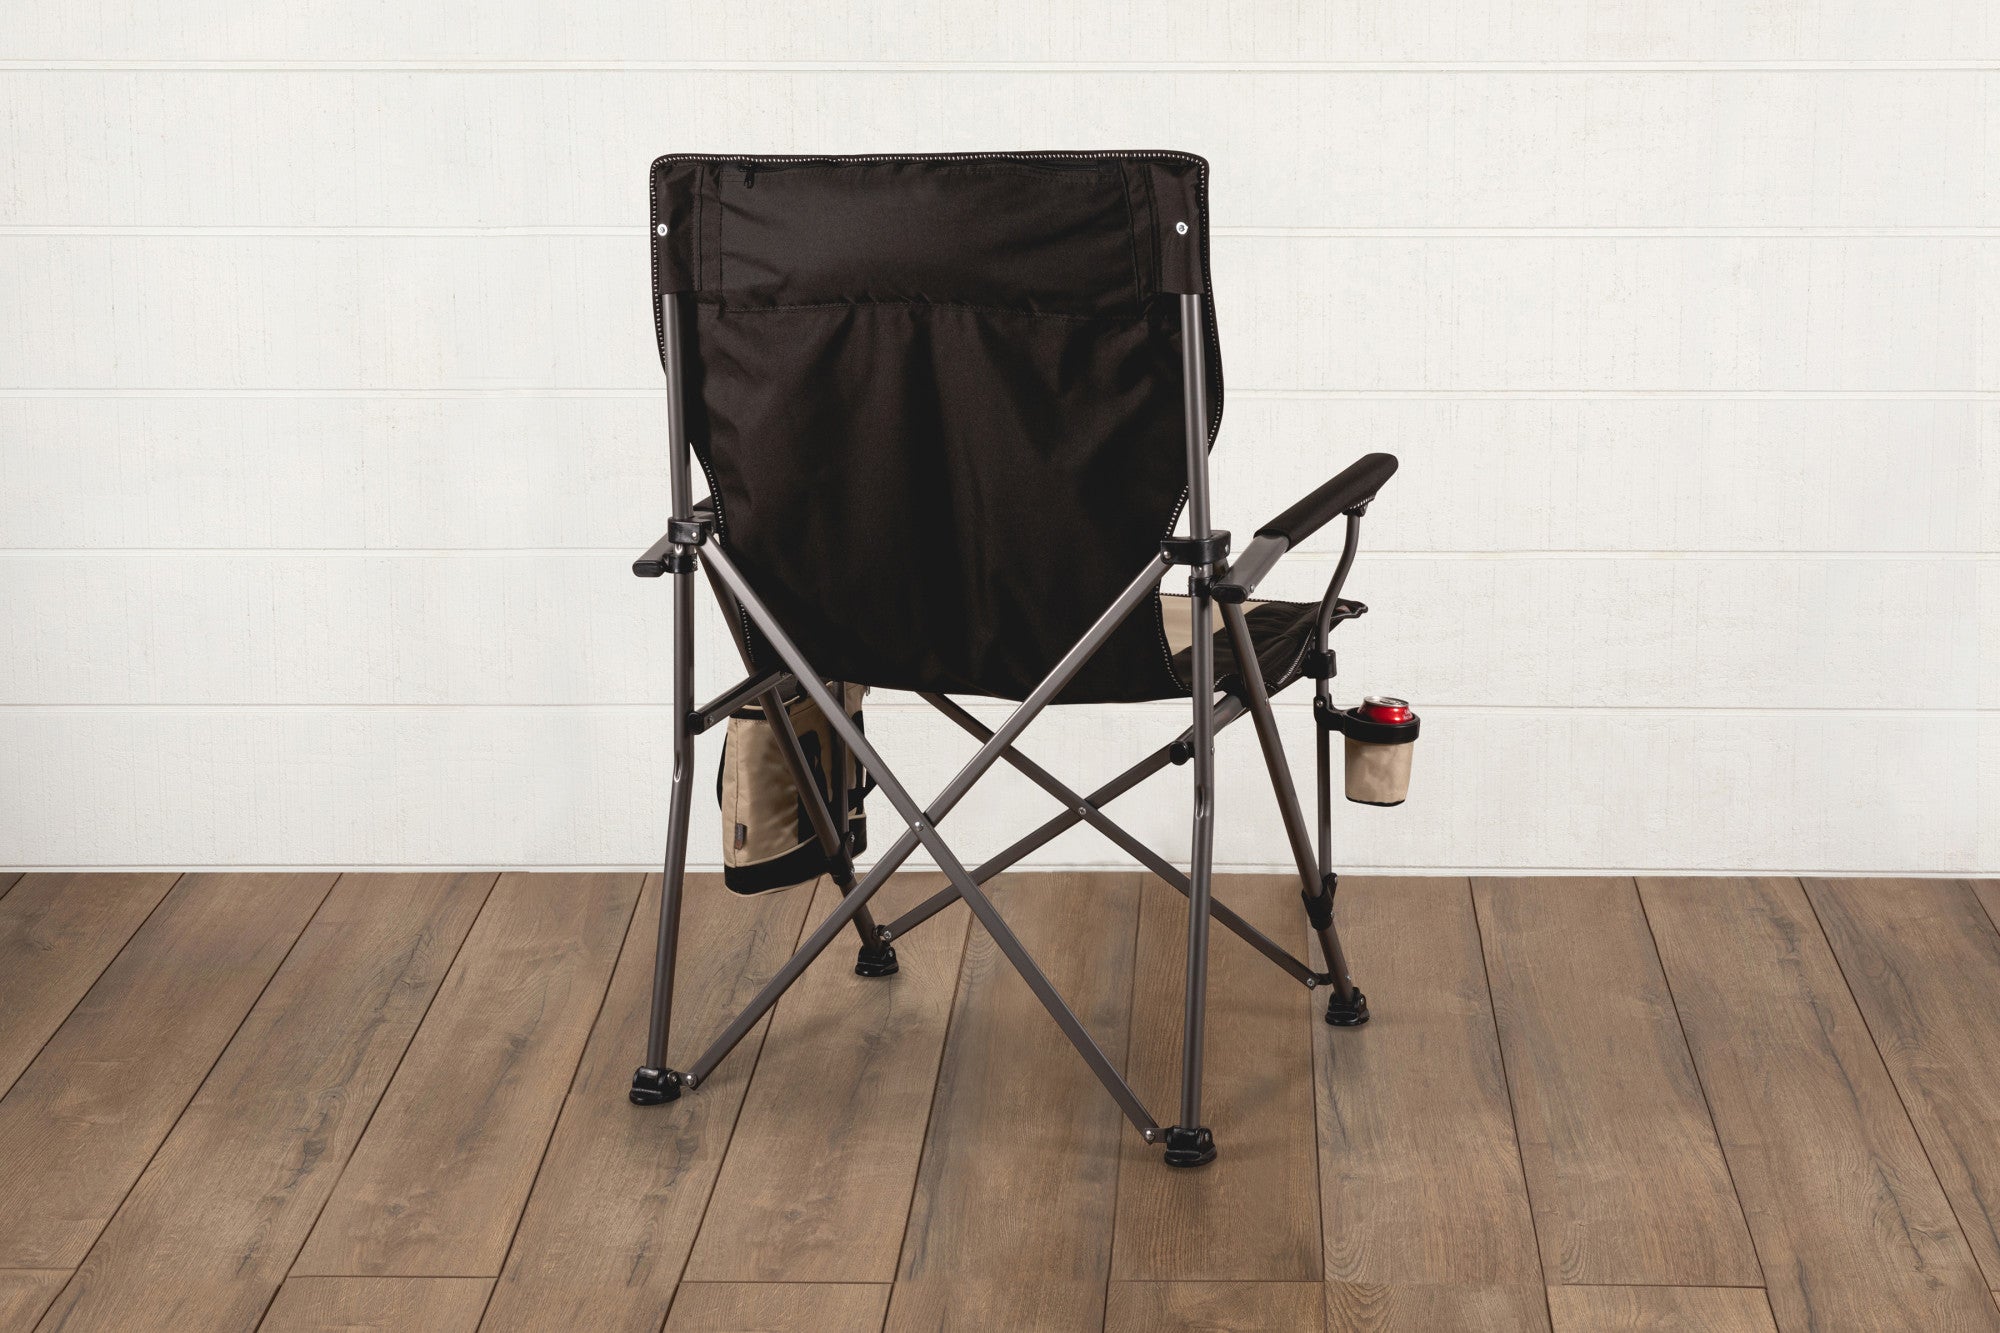 Miami Dolphins - Big Bear XXL Camping Chair with Cooler